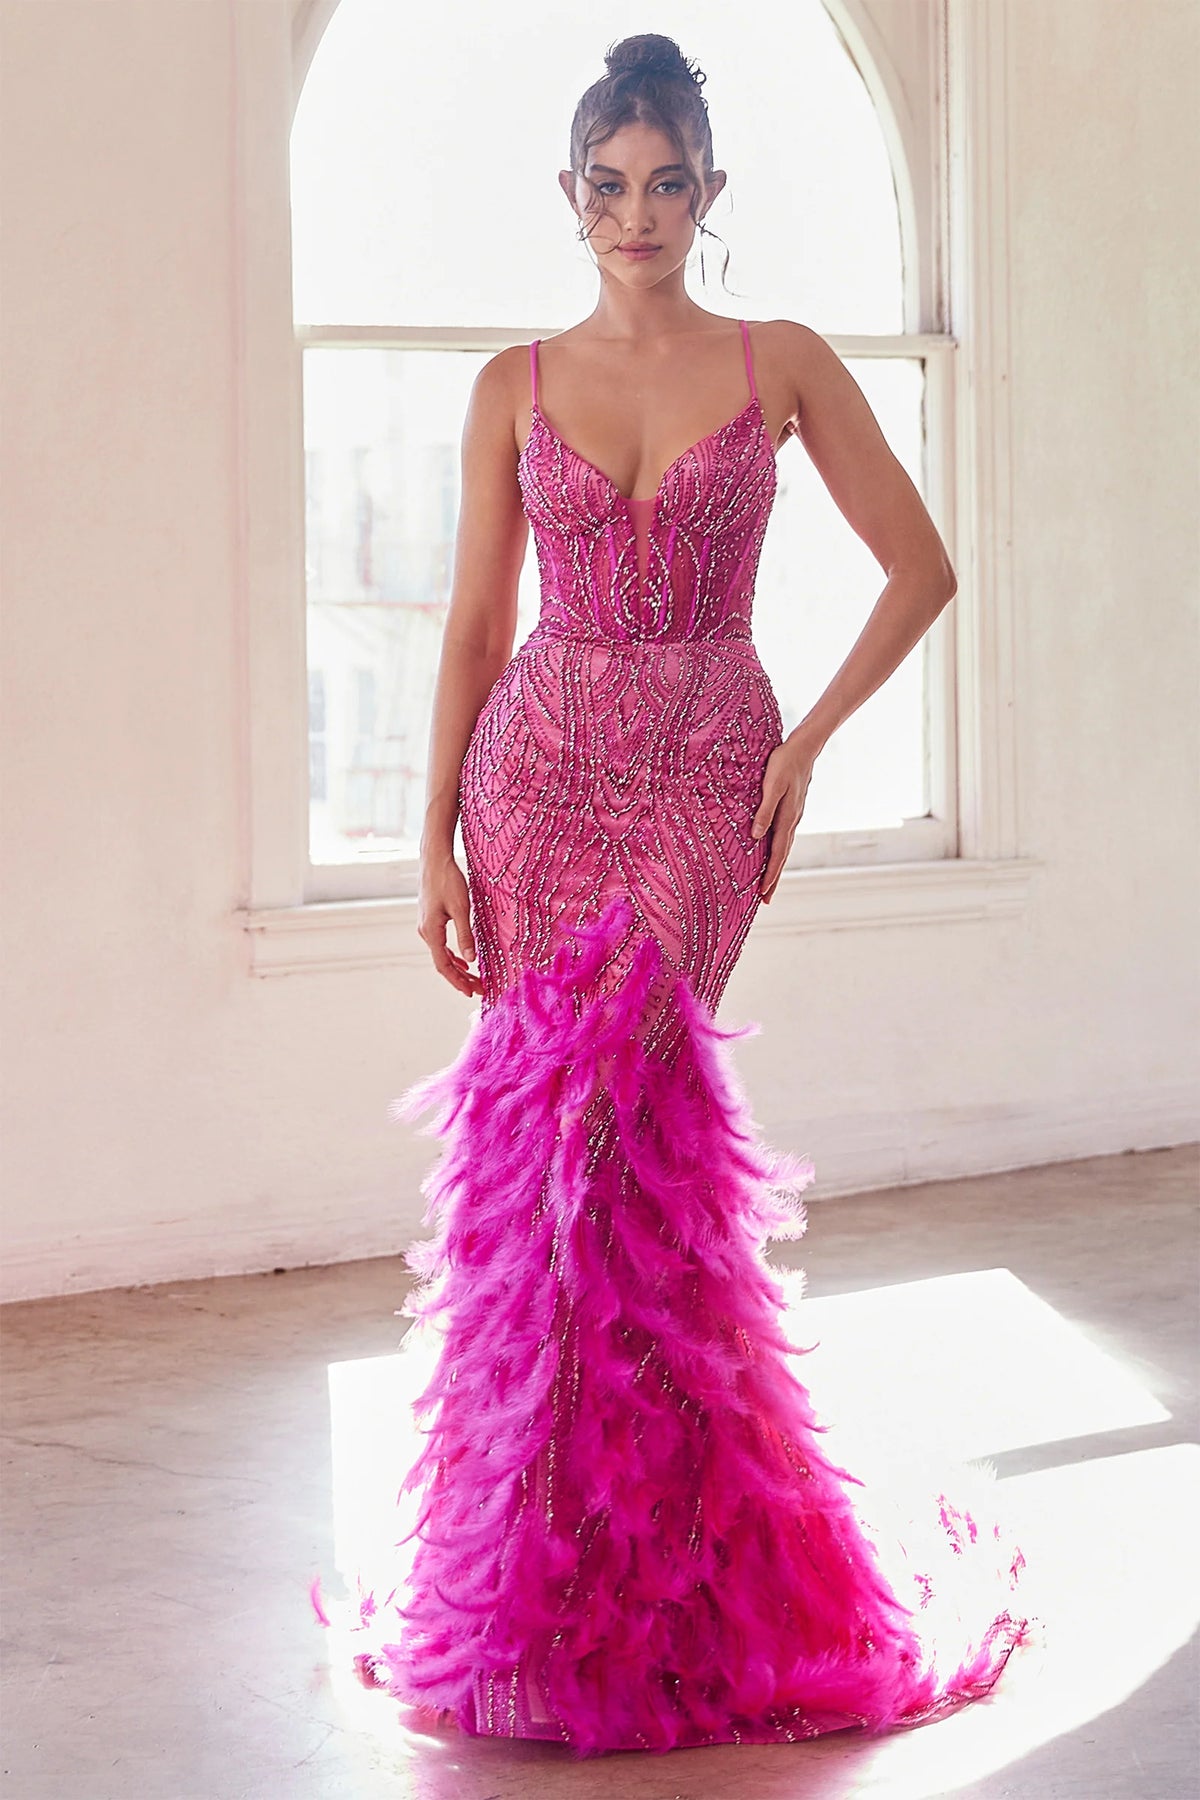 LaDivine - CC2308 - Mermaid Prom Dress with Feathered Skirt